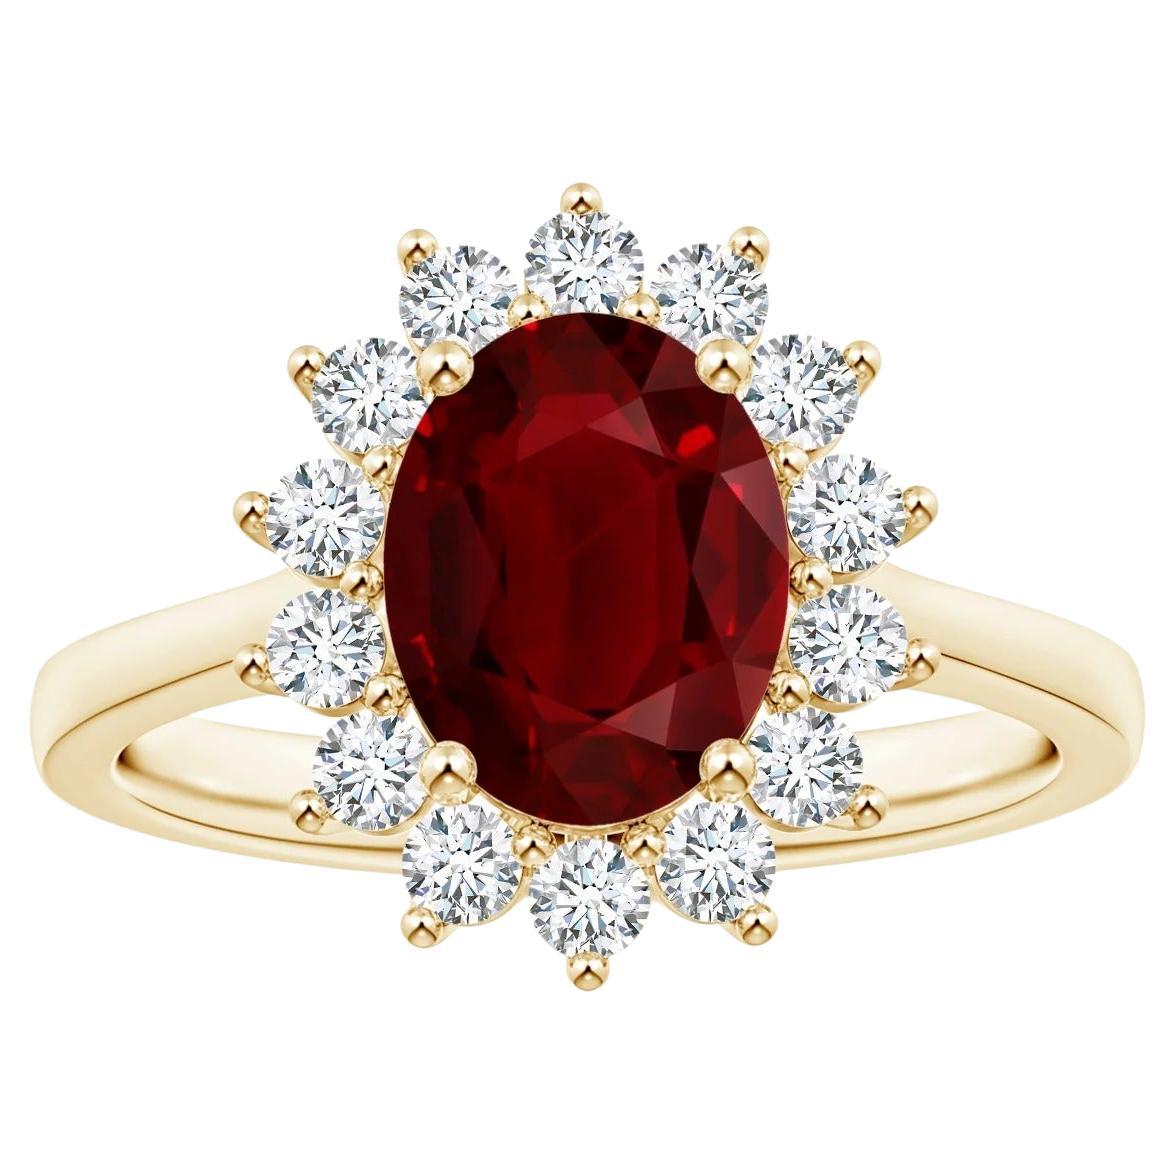 For Sale:  Angara GIA Certified Ruby Princess Diana Inspired Halo Ring in Yellow Gold